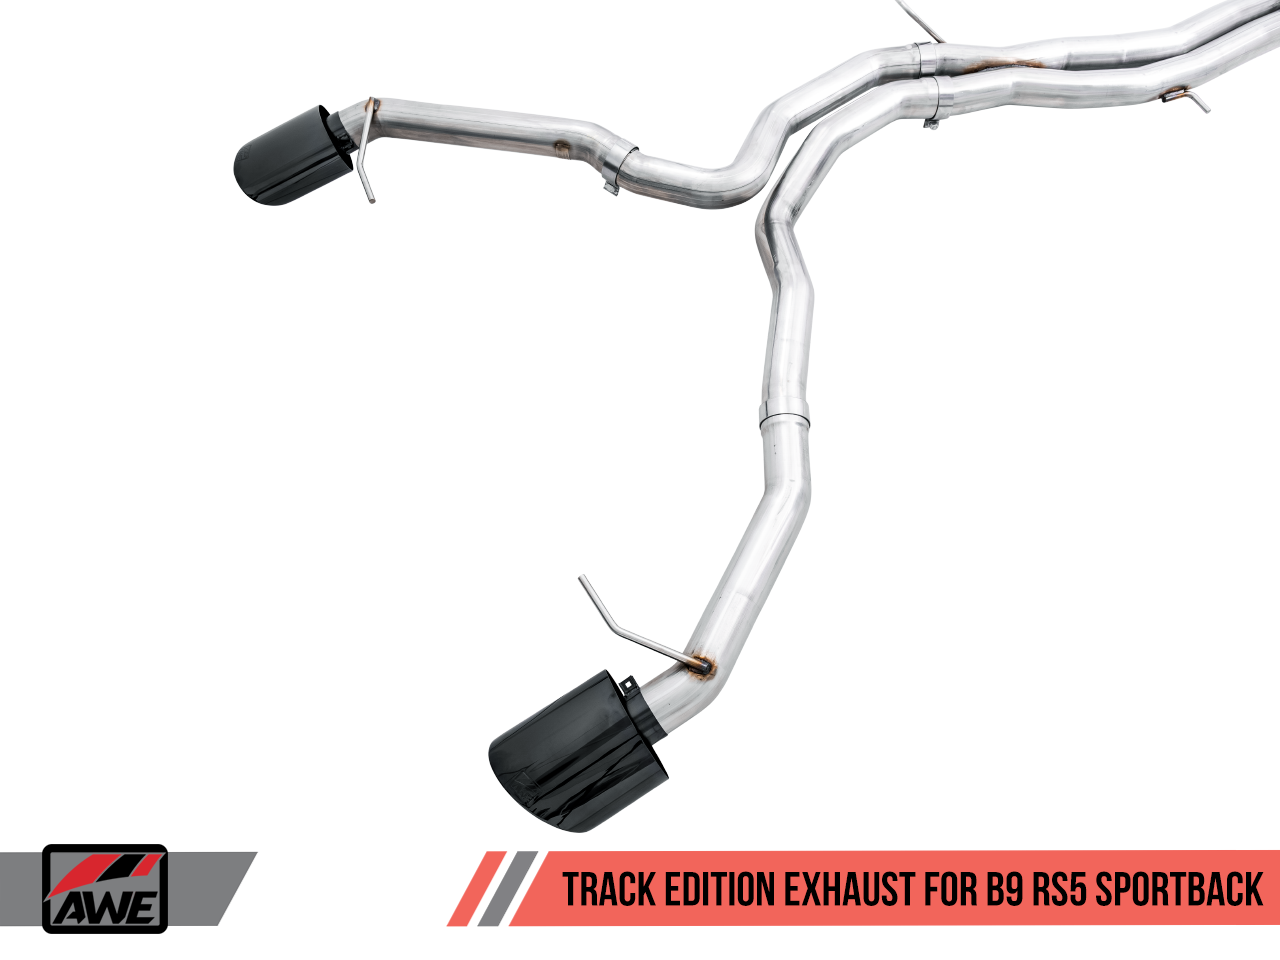 AWE Touring Edition Exhaust for Audi B9 RS 5 Sportback - Resonated for Performance Catalysts - Diamond Black RS-style Tips - Motorsports LA